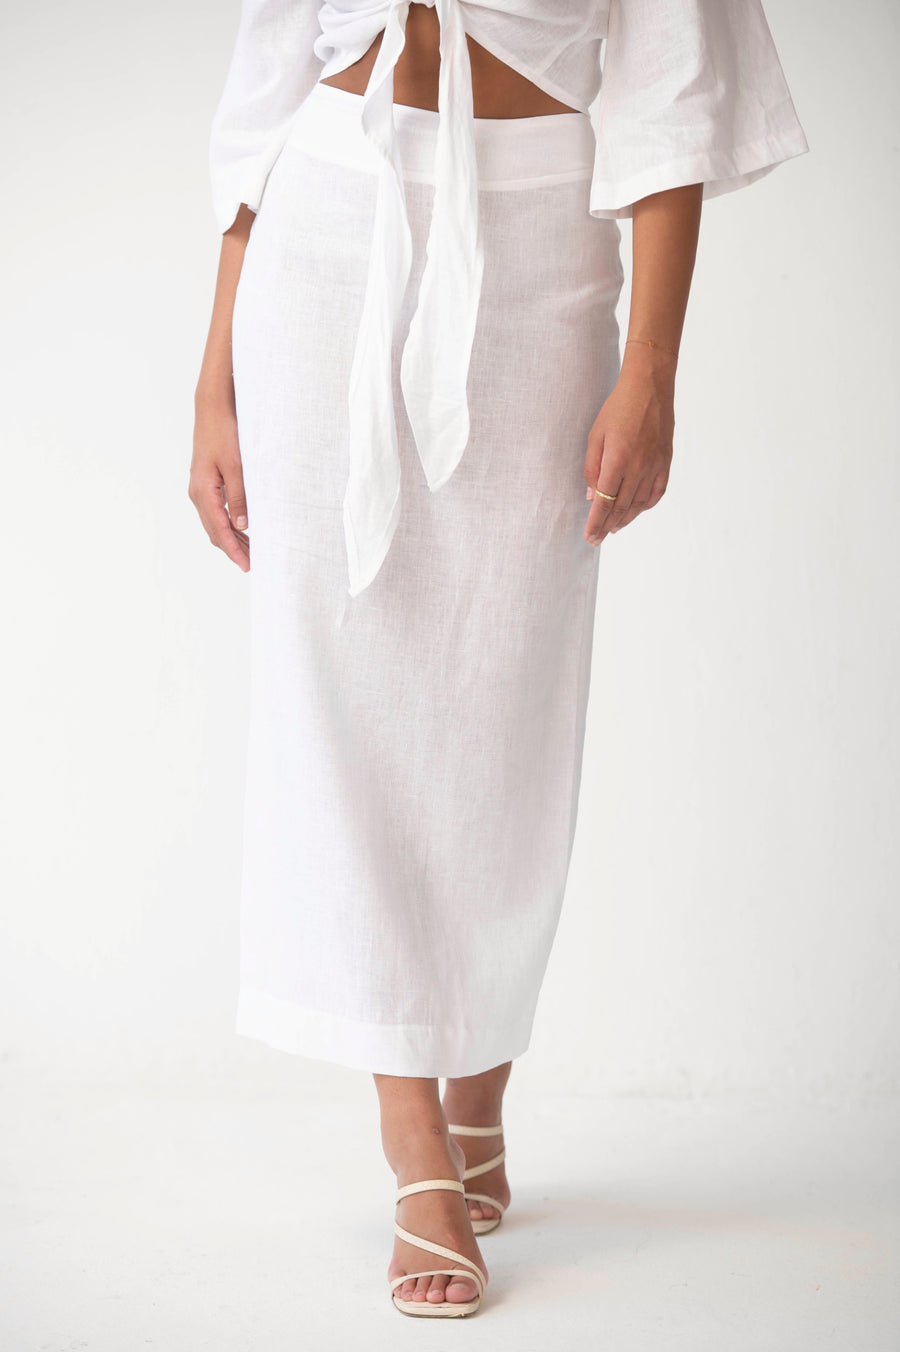 The Maxi Skirt in White